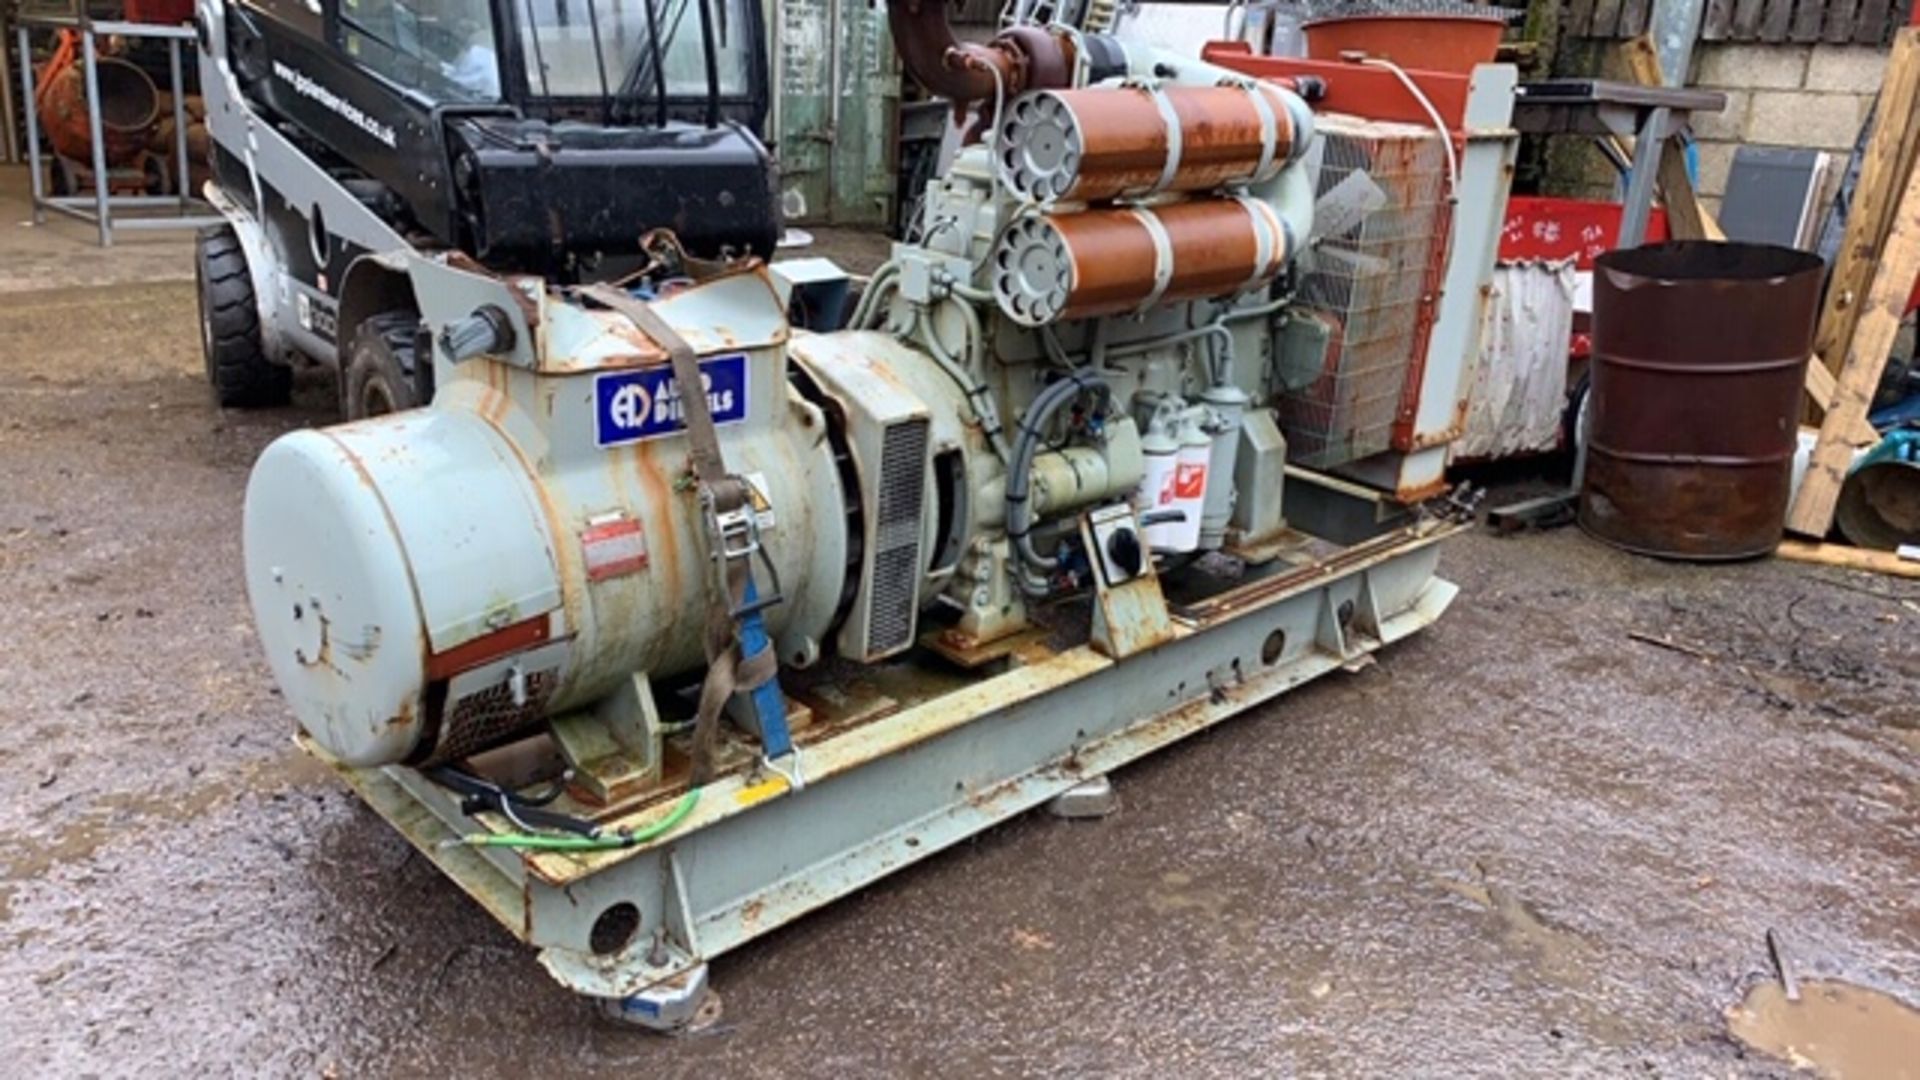 VOLVO ENGINED AUTO DIESELS 200KVA GENERATOR SET. EX AIRPORT STANDBY USE. REMOVED IN RUNNING